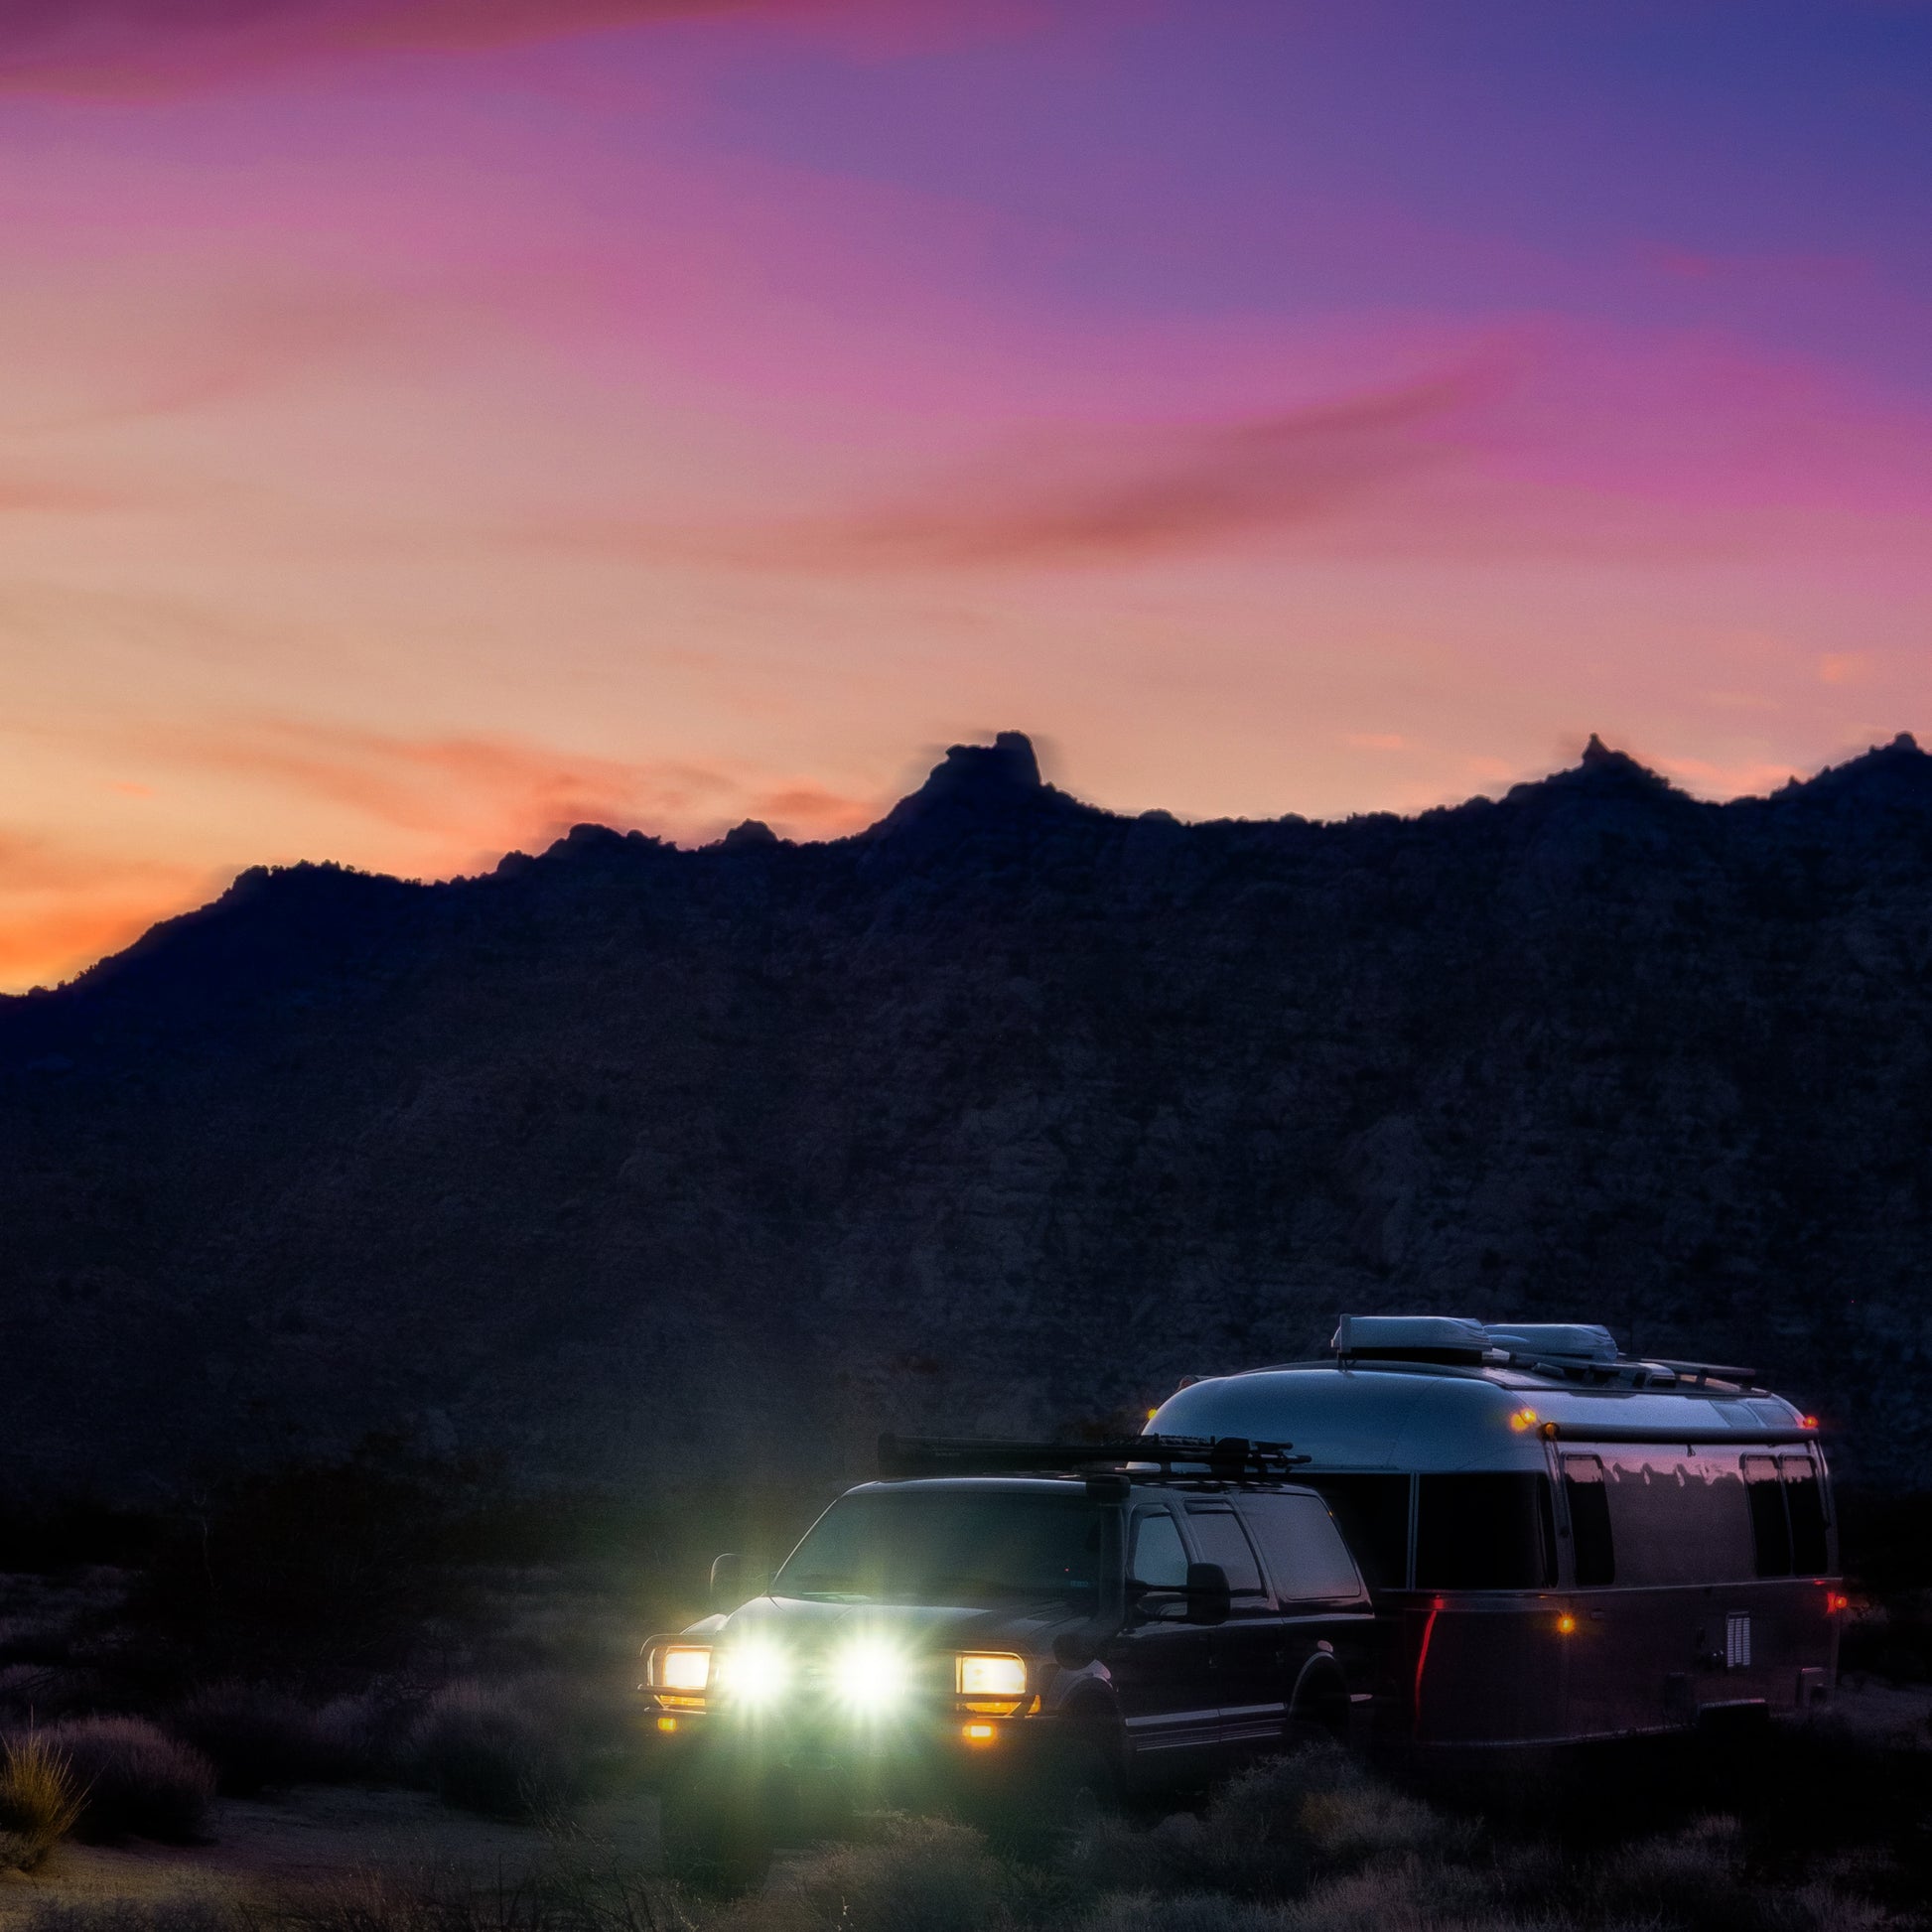 An RV camping in the wilderness at dusk with the mountains in the background under a purple sky. The vehicle's headlights are on, creating a sense of adventure and solitude in the vast outdoors